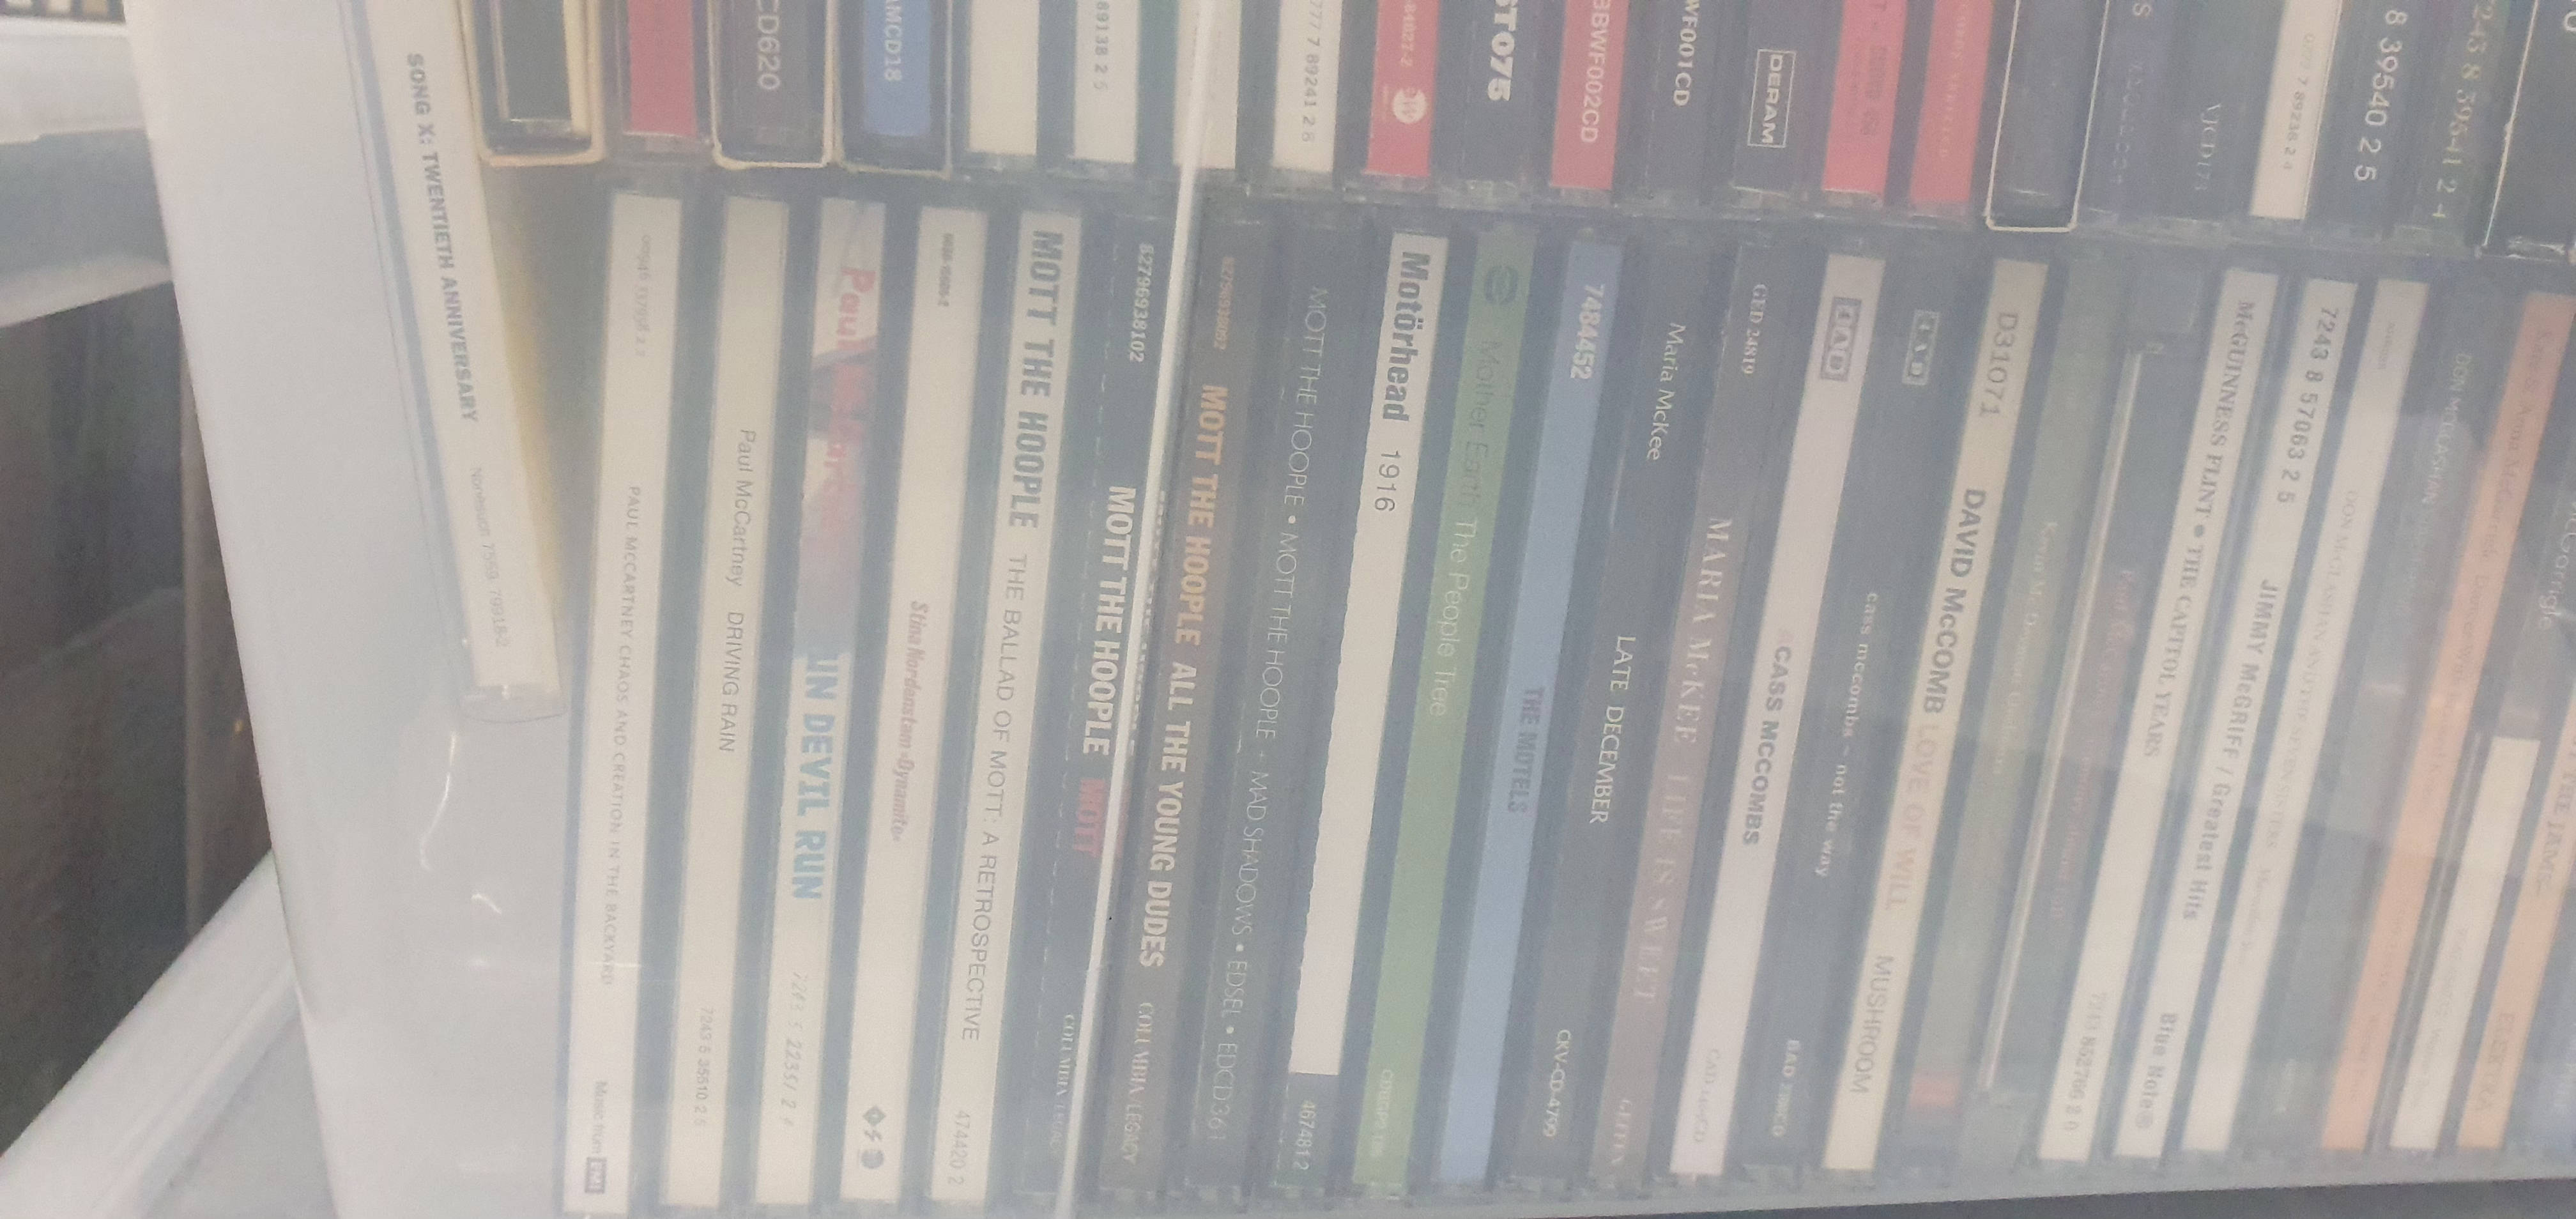 LARGE COLLECTION OF APPROX 200 MUSIC CD'S - Image 5 of 10